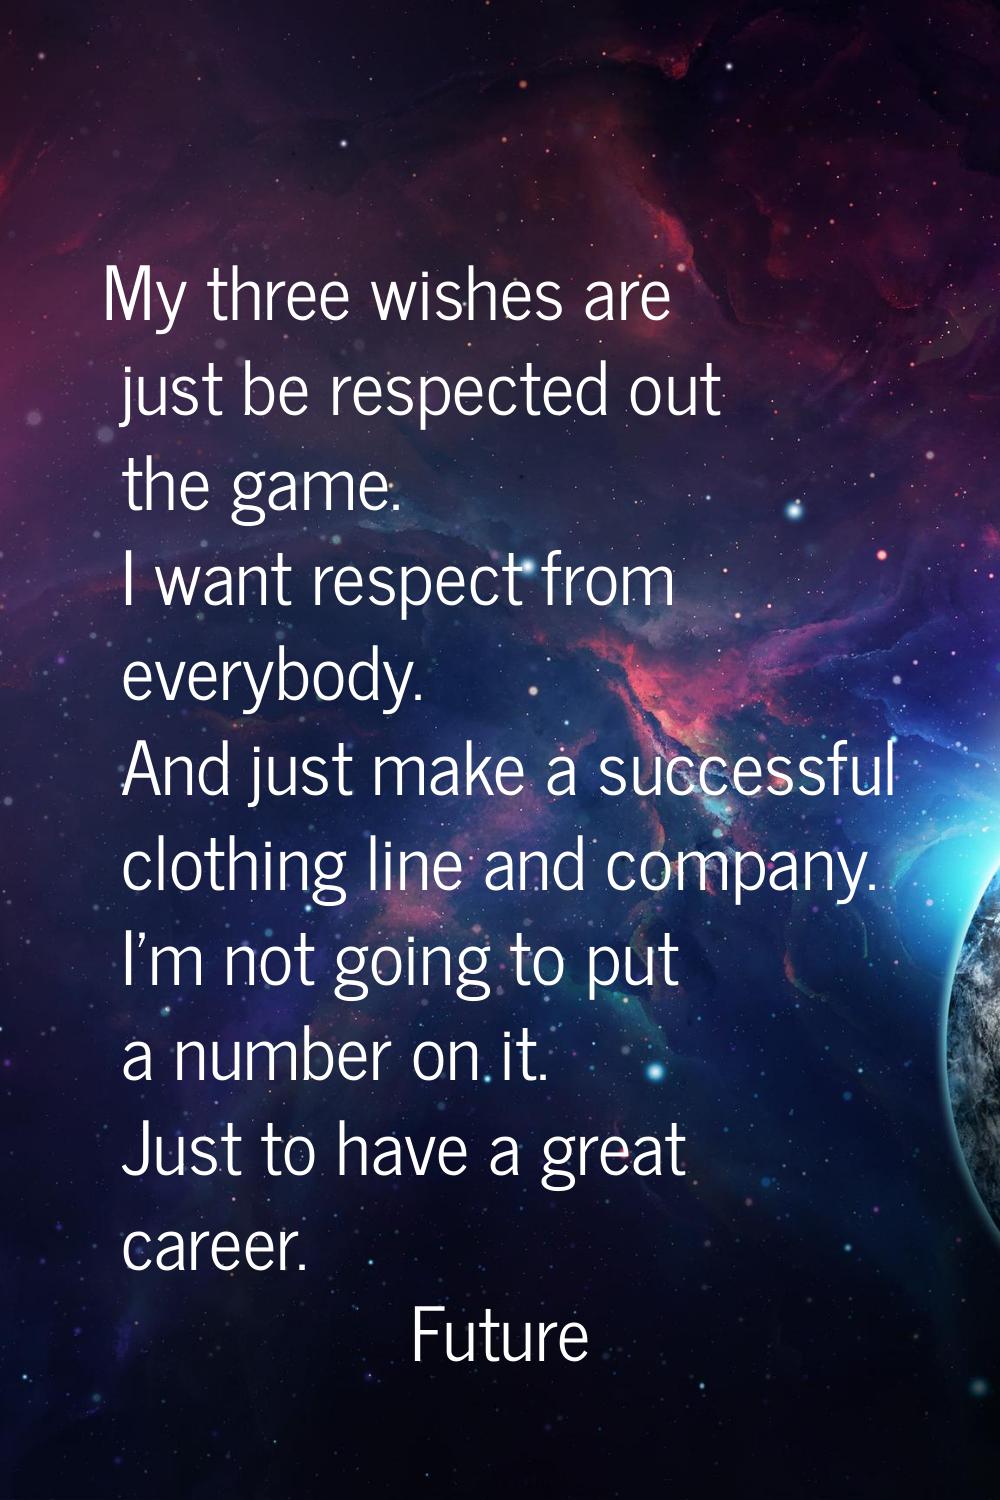 My three wishes are just be respected out the game. I want respect from everybody. And just make a 